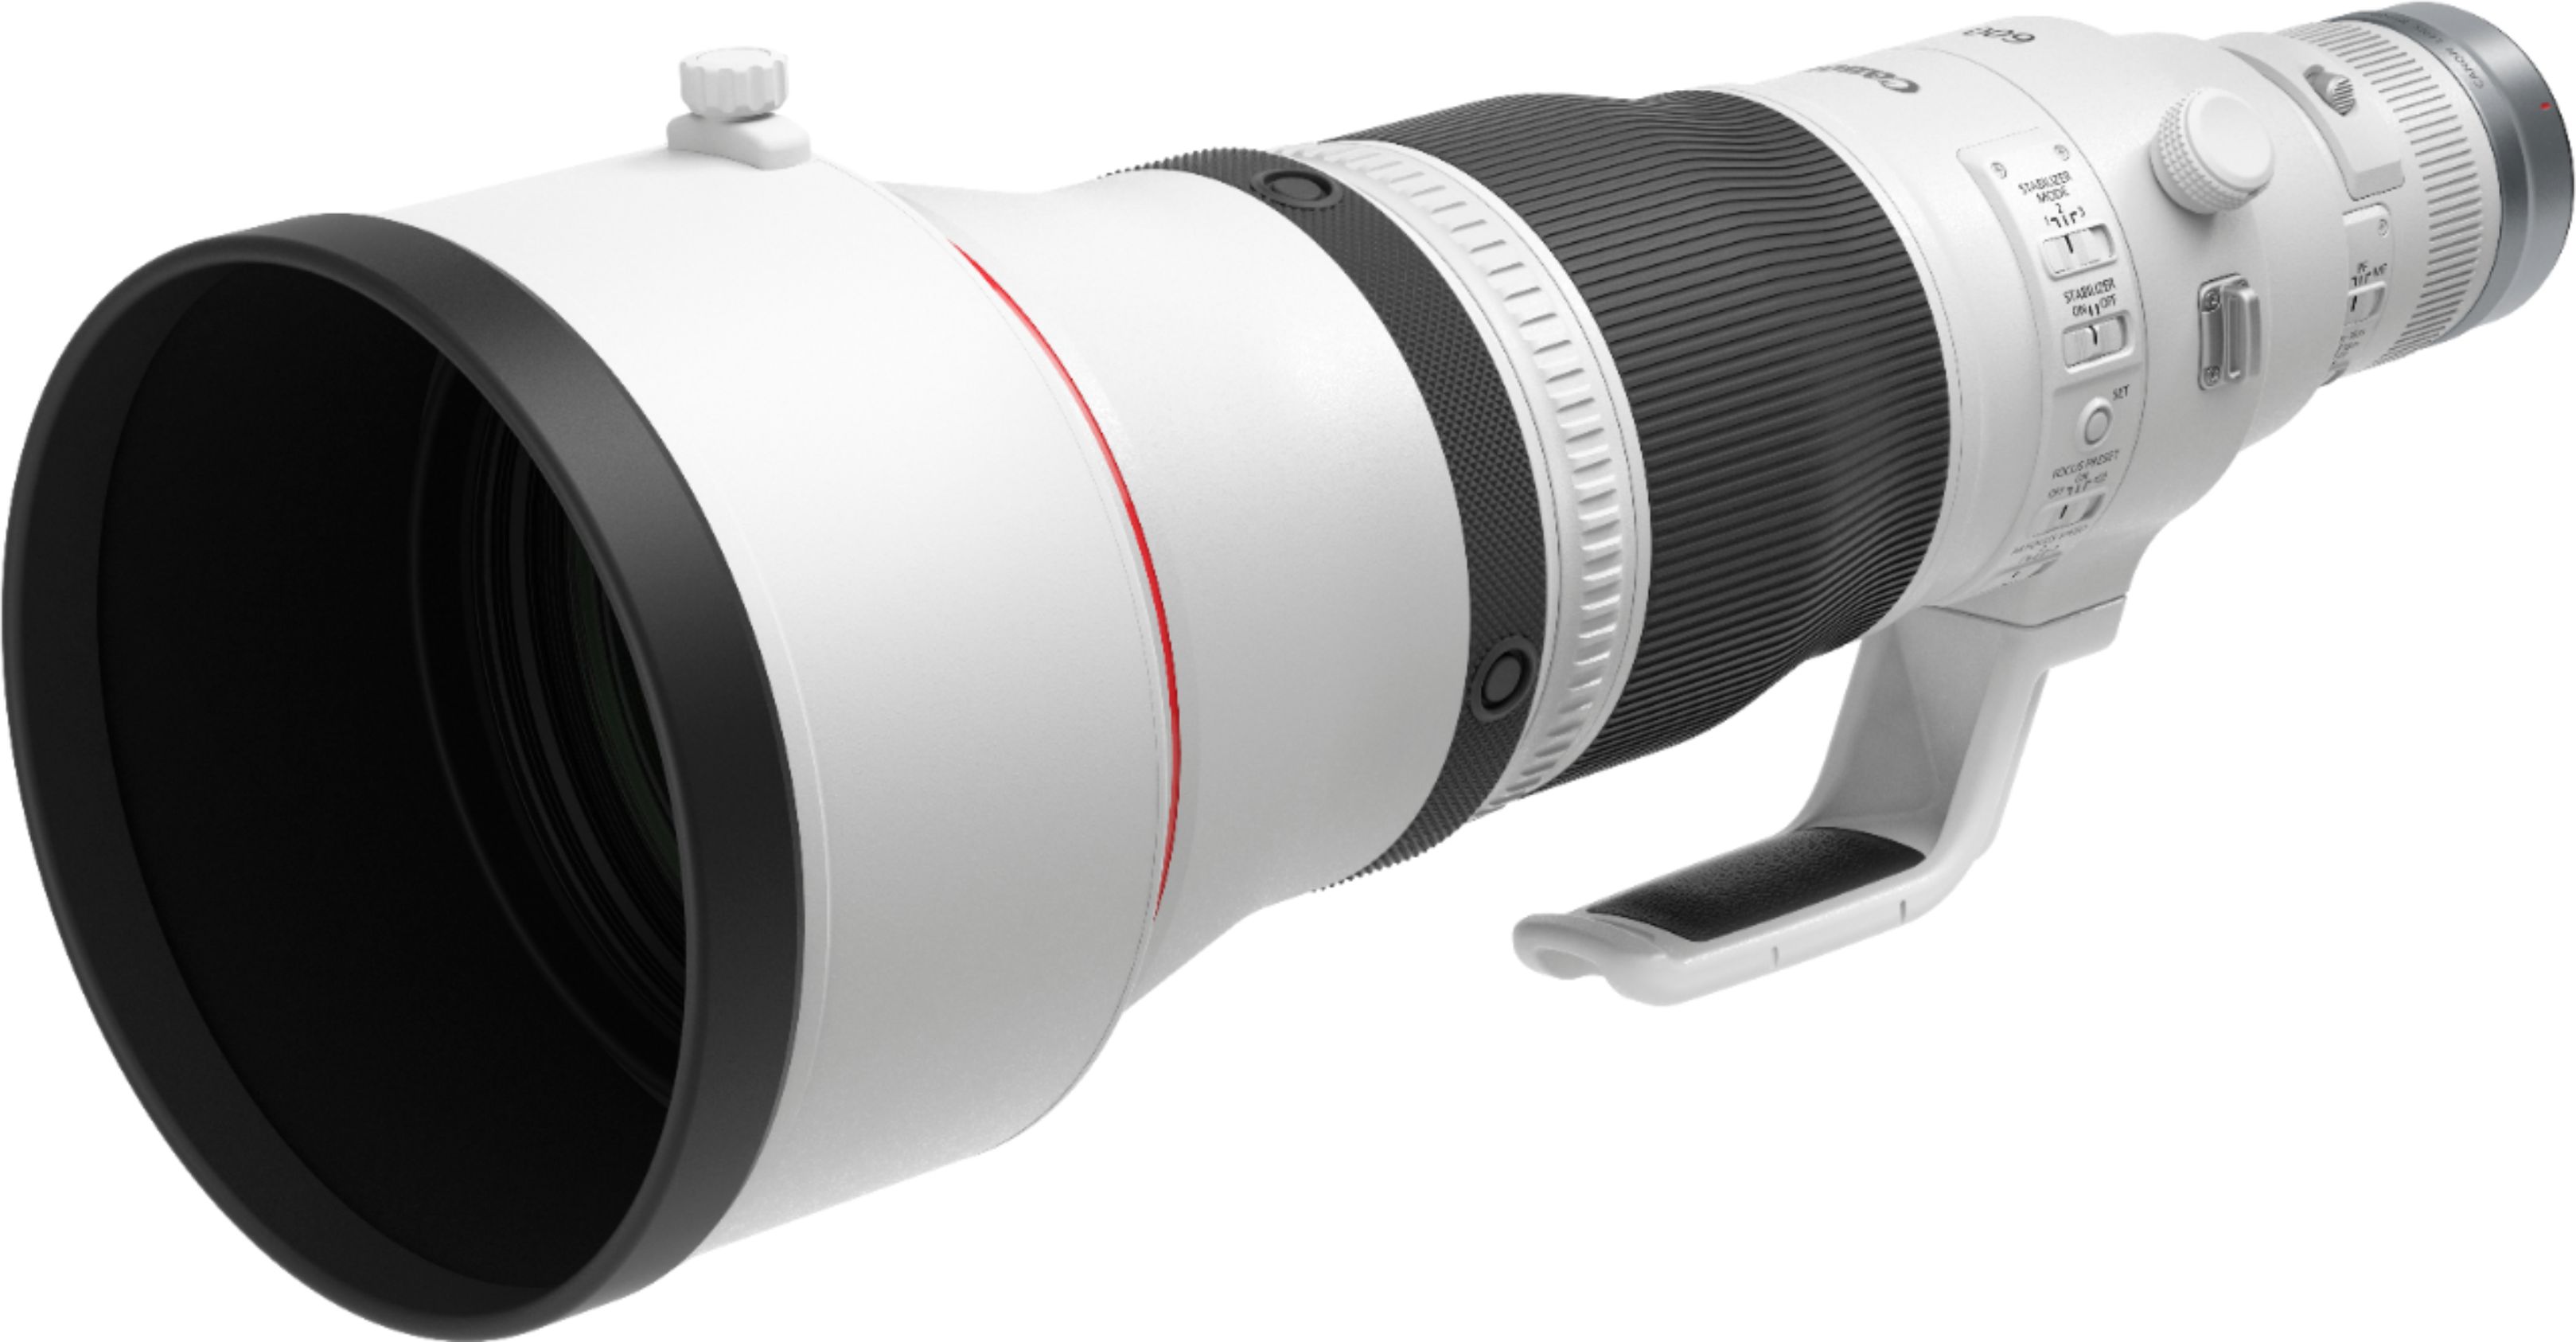 Angle View: Canon - RF 600 f/4 L IS USM Telephoto Prime Lens for RF Mount Cameras - White